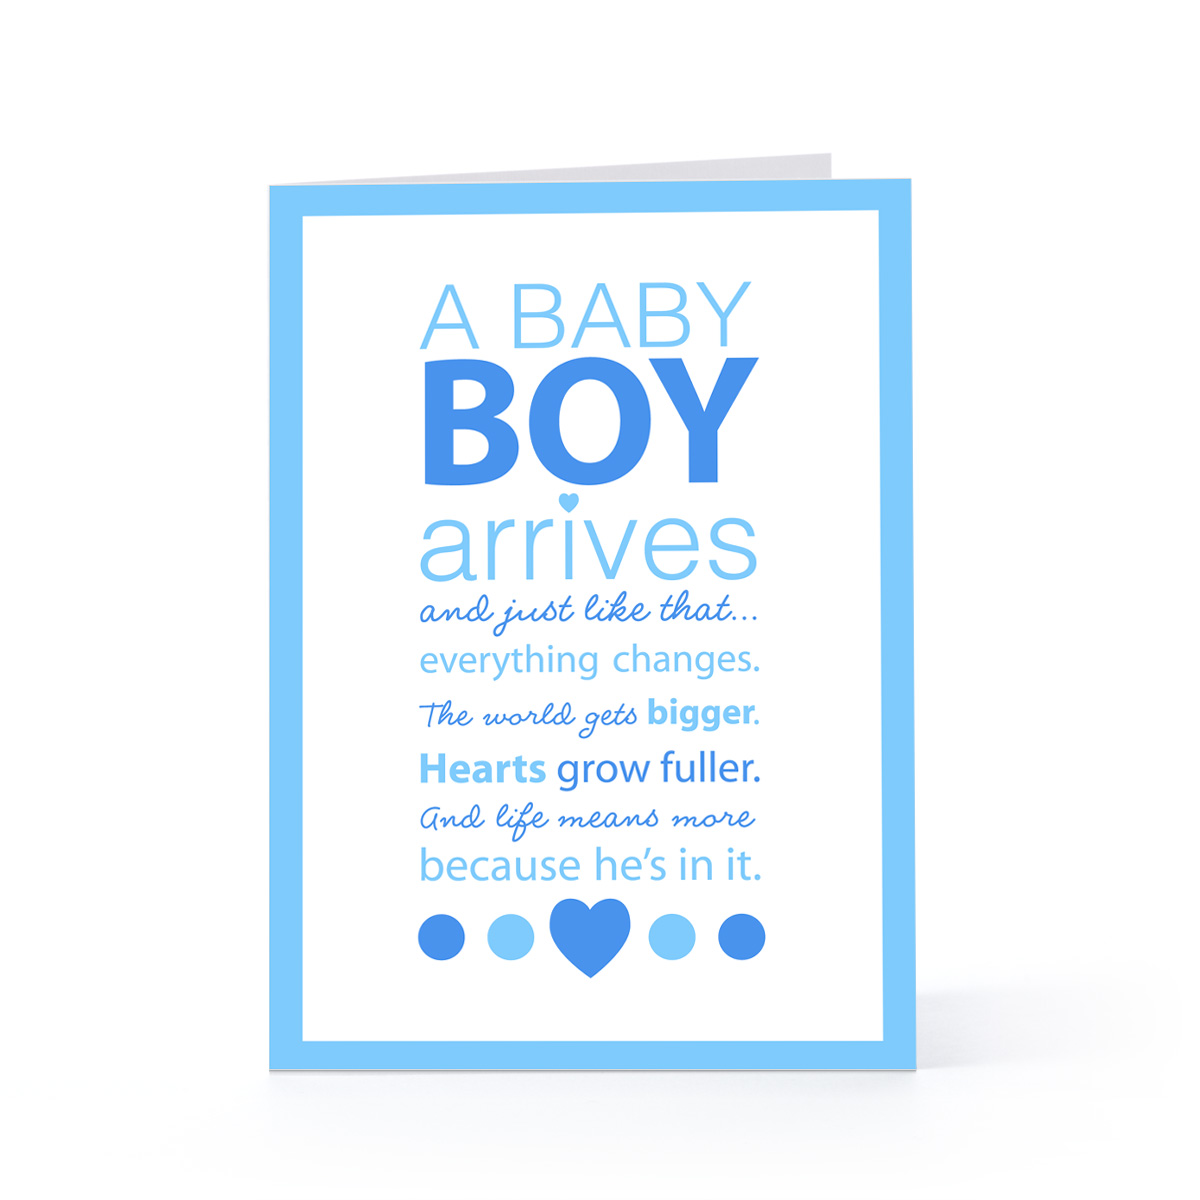 Quotes From A Baby Boys. QuotesGram